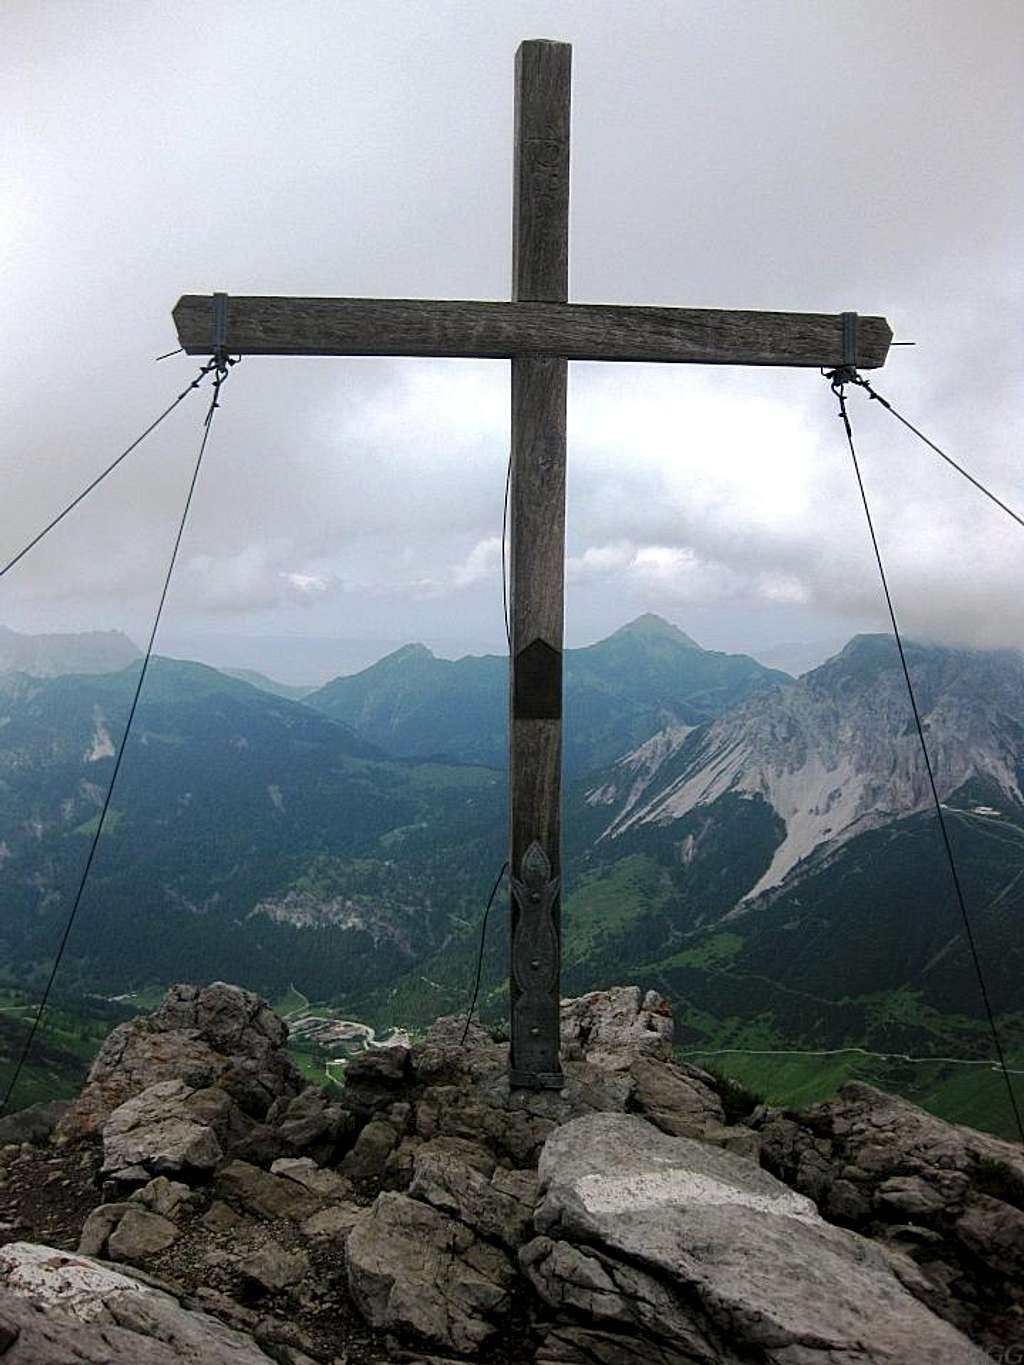 Augstenberg 'summit' cross (2359m), at the wrong place...